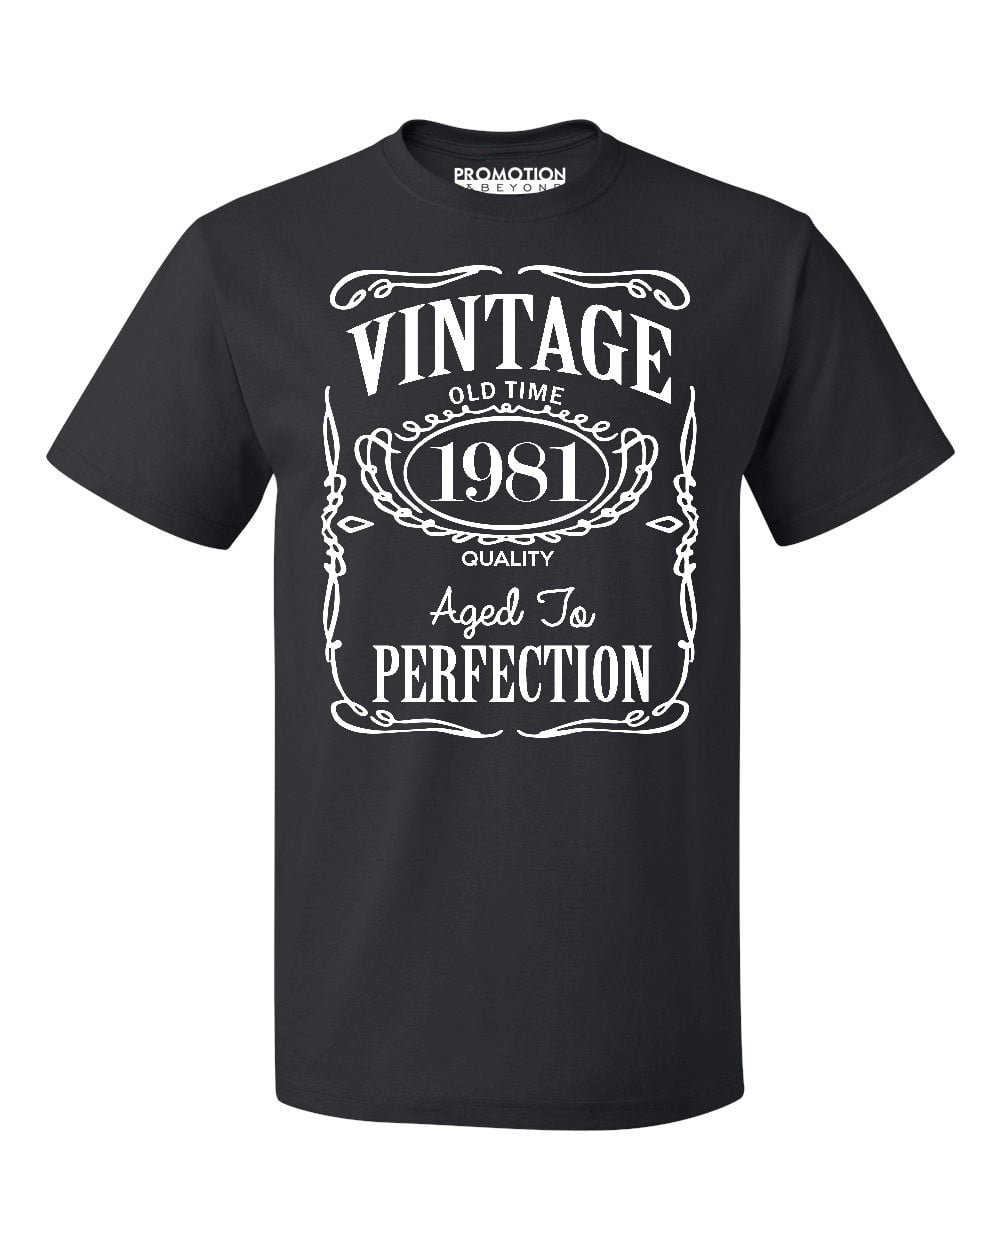 40th birthday gift 40th birthday Shirt Awesome since 1981 Vintage Limited Edition 1981 birthday Well-aged. Vintage 1981 t-shirt